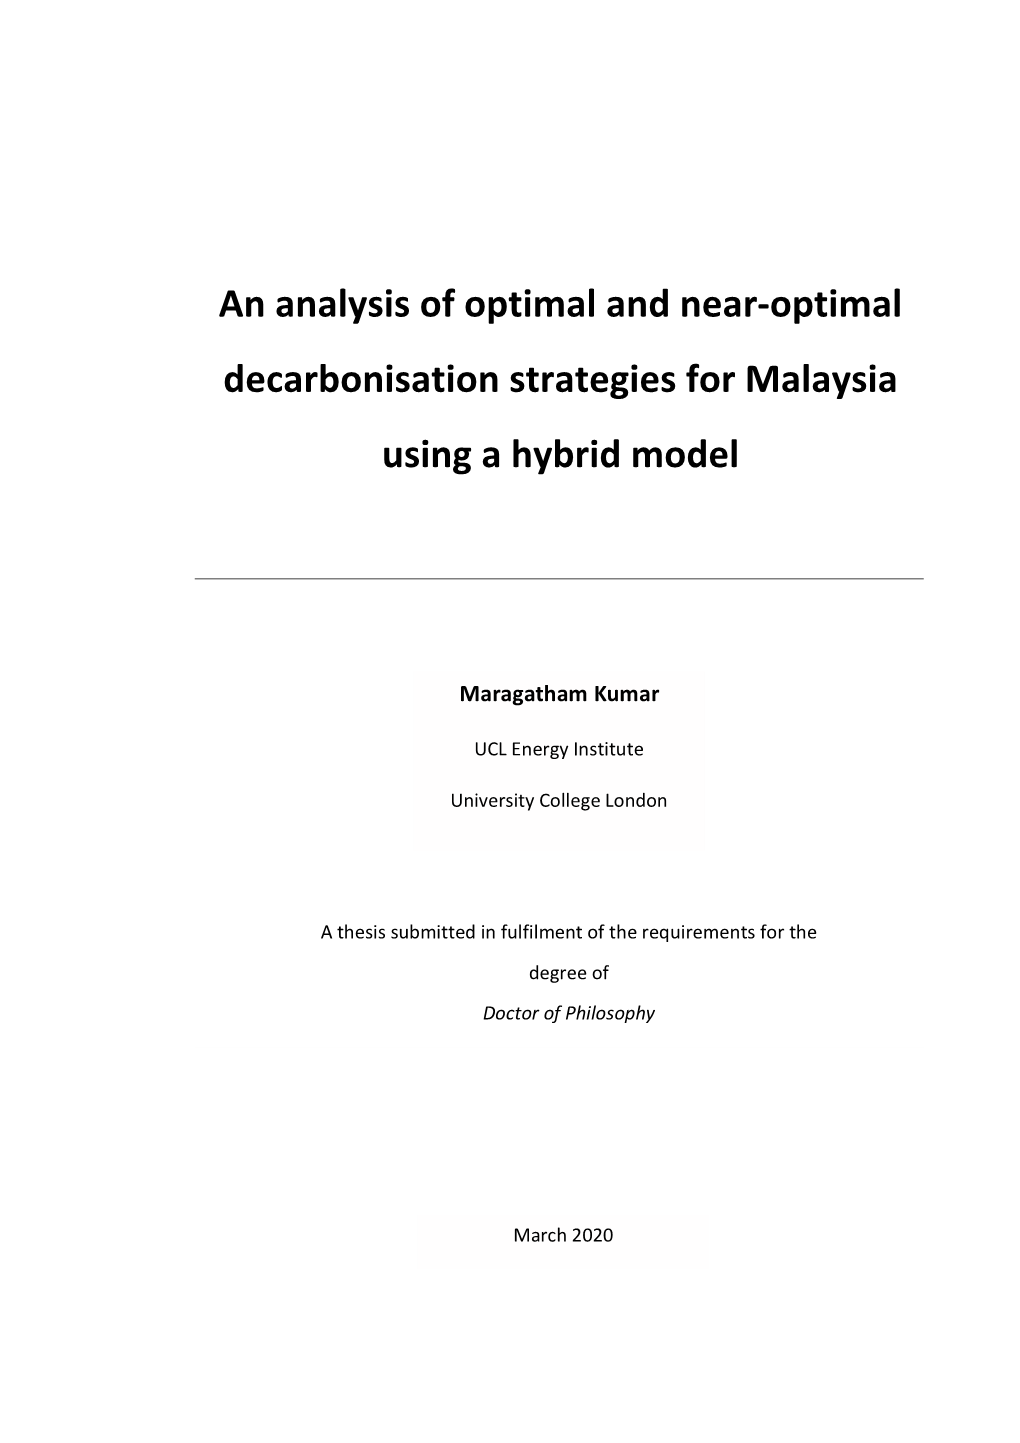 An Analysis of Optimal and Near-Optimal Decarbonisation Strategies for Malaysia Using a Hybrid Model